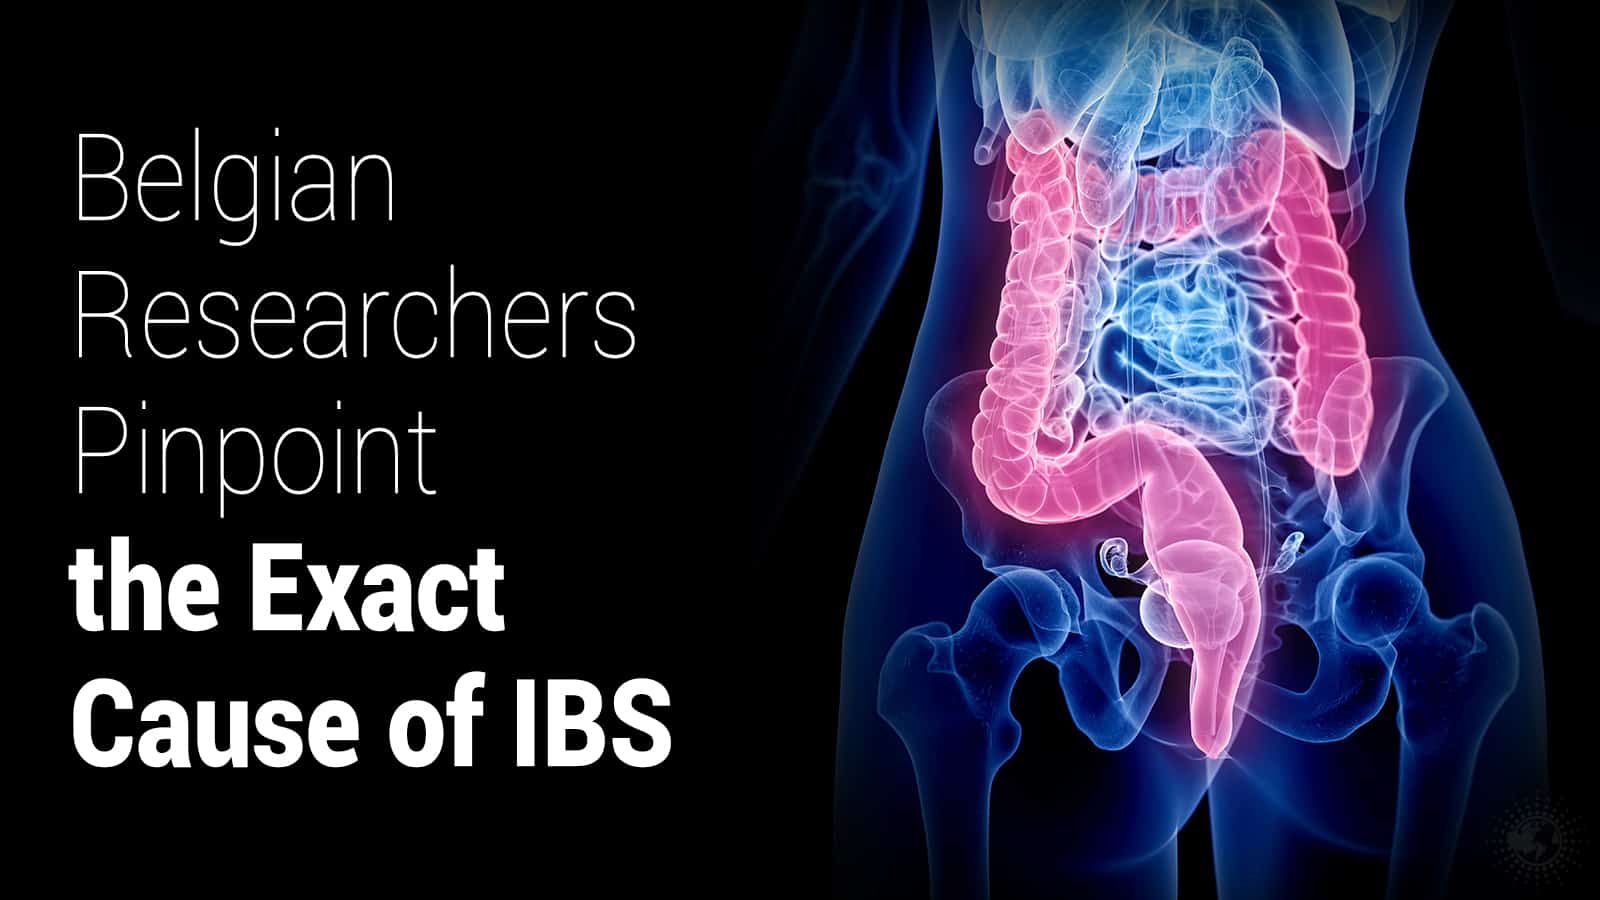 Belgian Researchers Pinpoint the Exact Cause of IBS